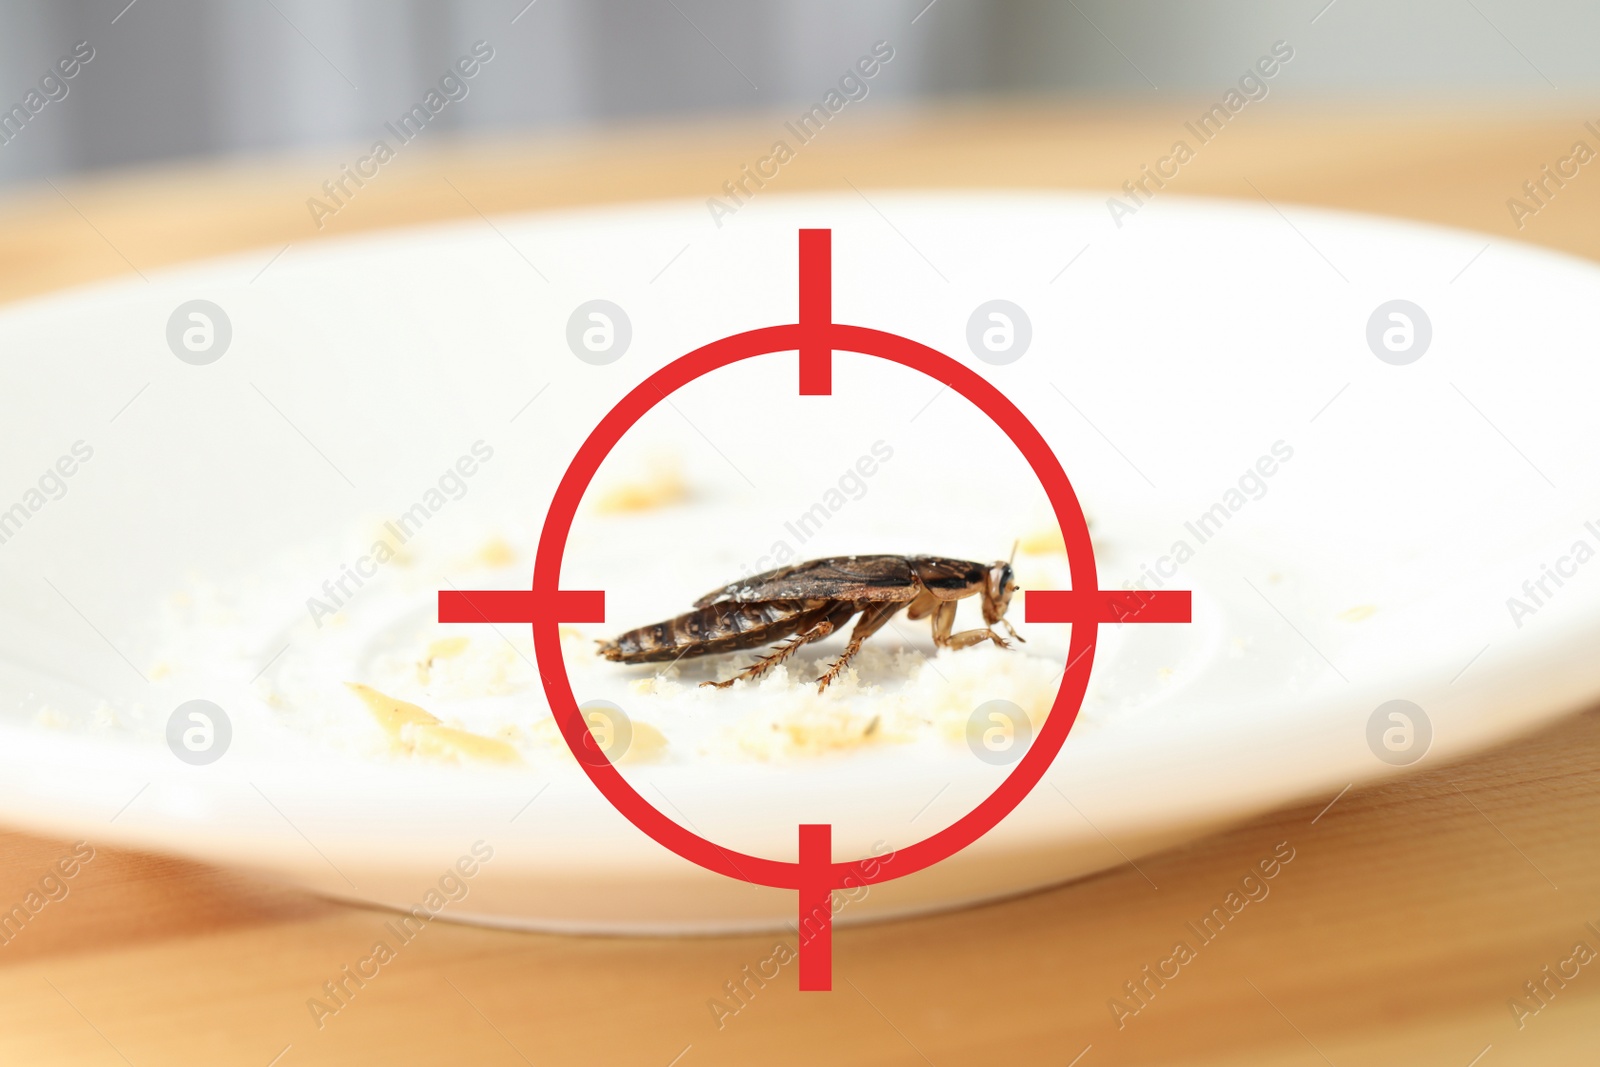 Image of Cockroach with red target symbol on white plate. Pest control